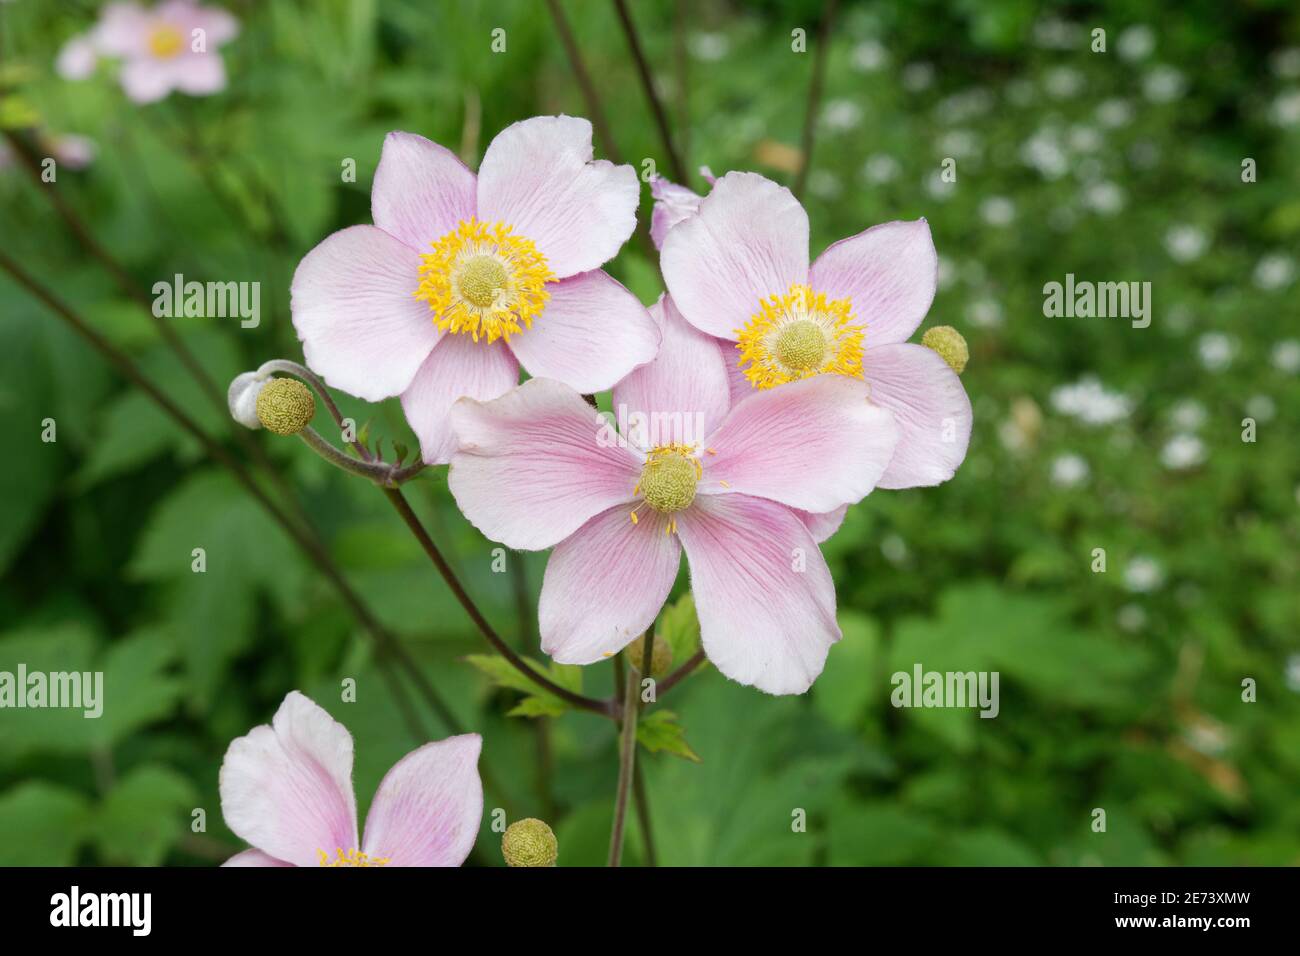 Anemone hupehensis, close up of anemone in bloom Stock Photo